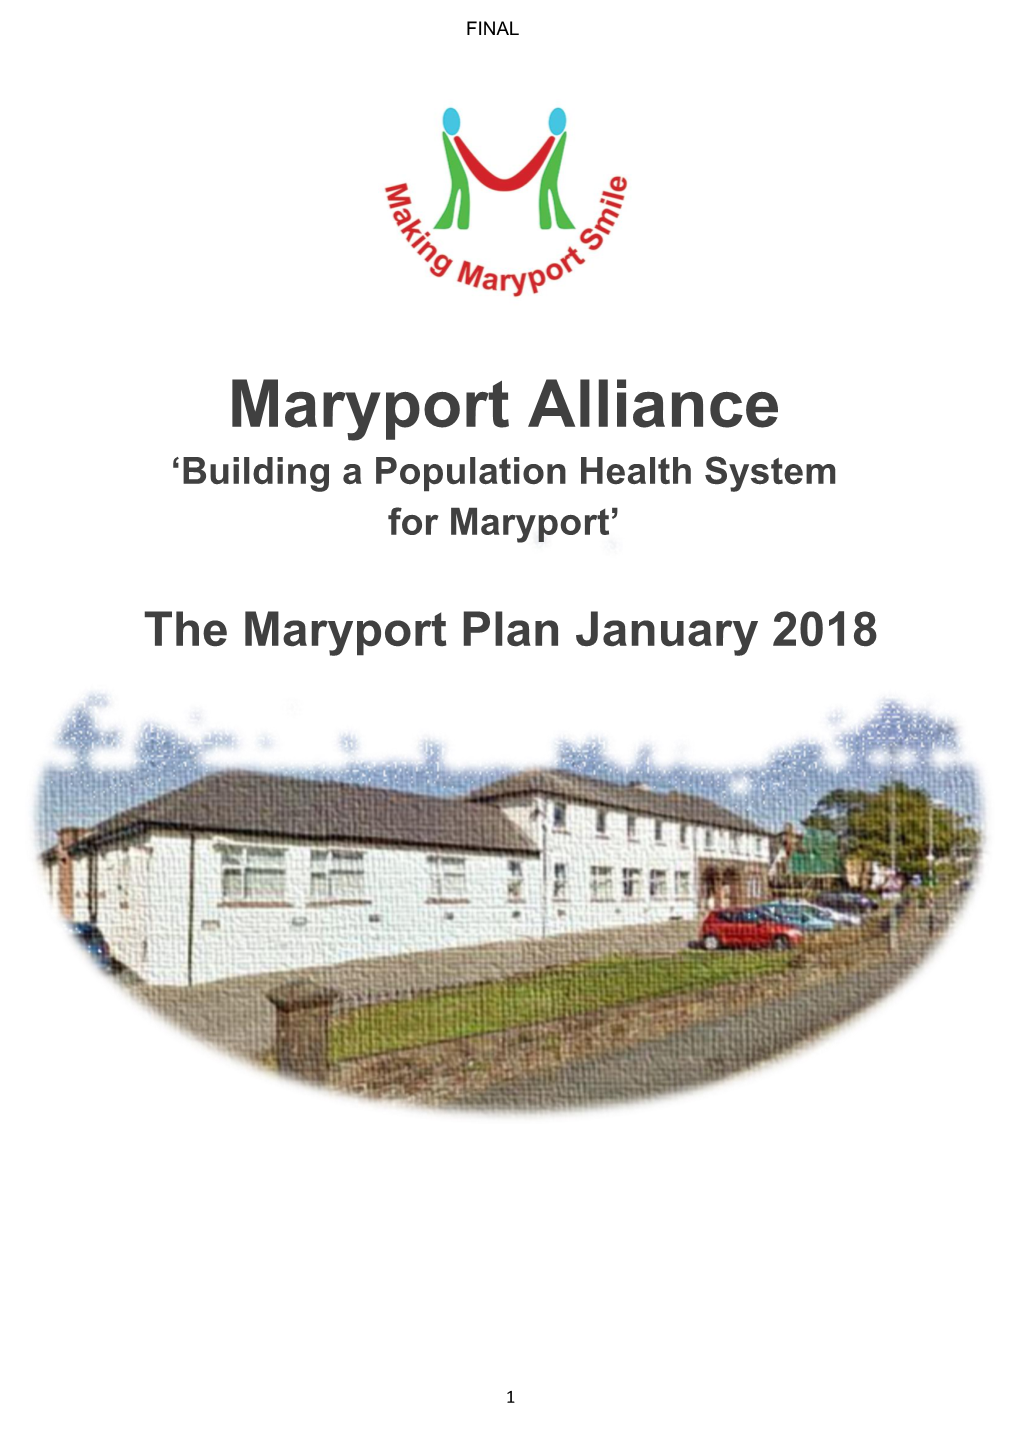 Maryport Alliance ‘Building a Population Health System for Maryport’